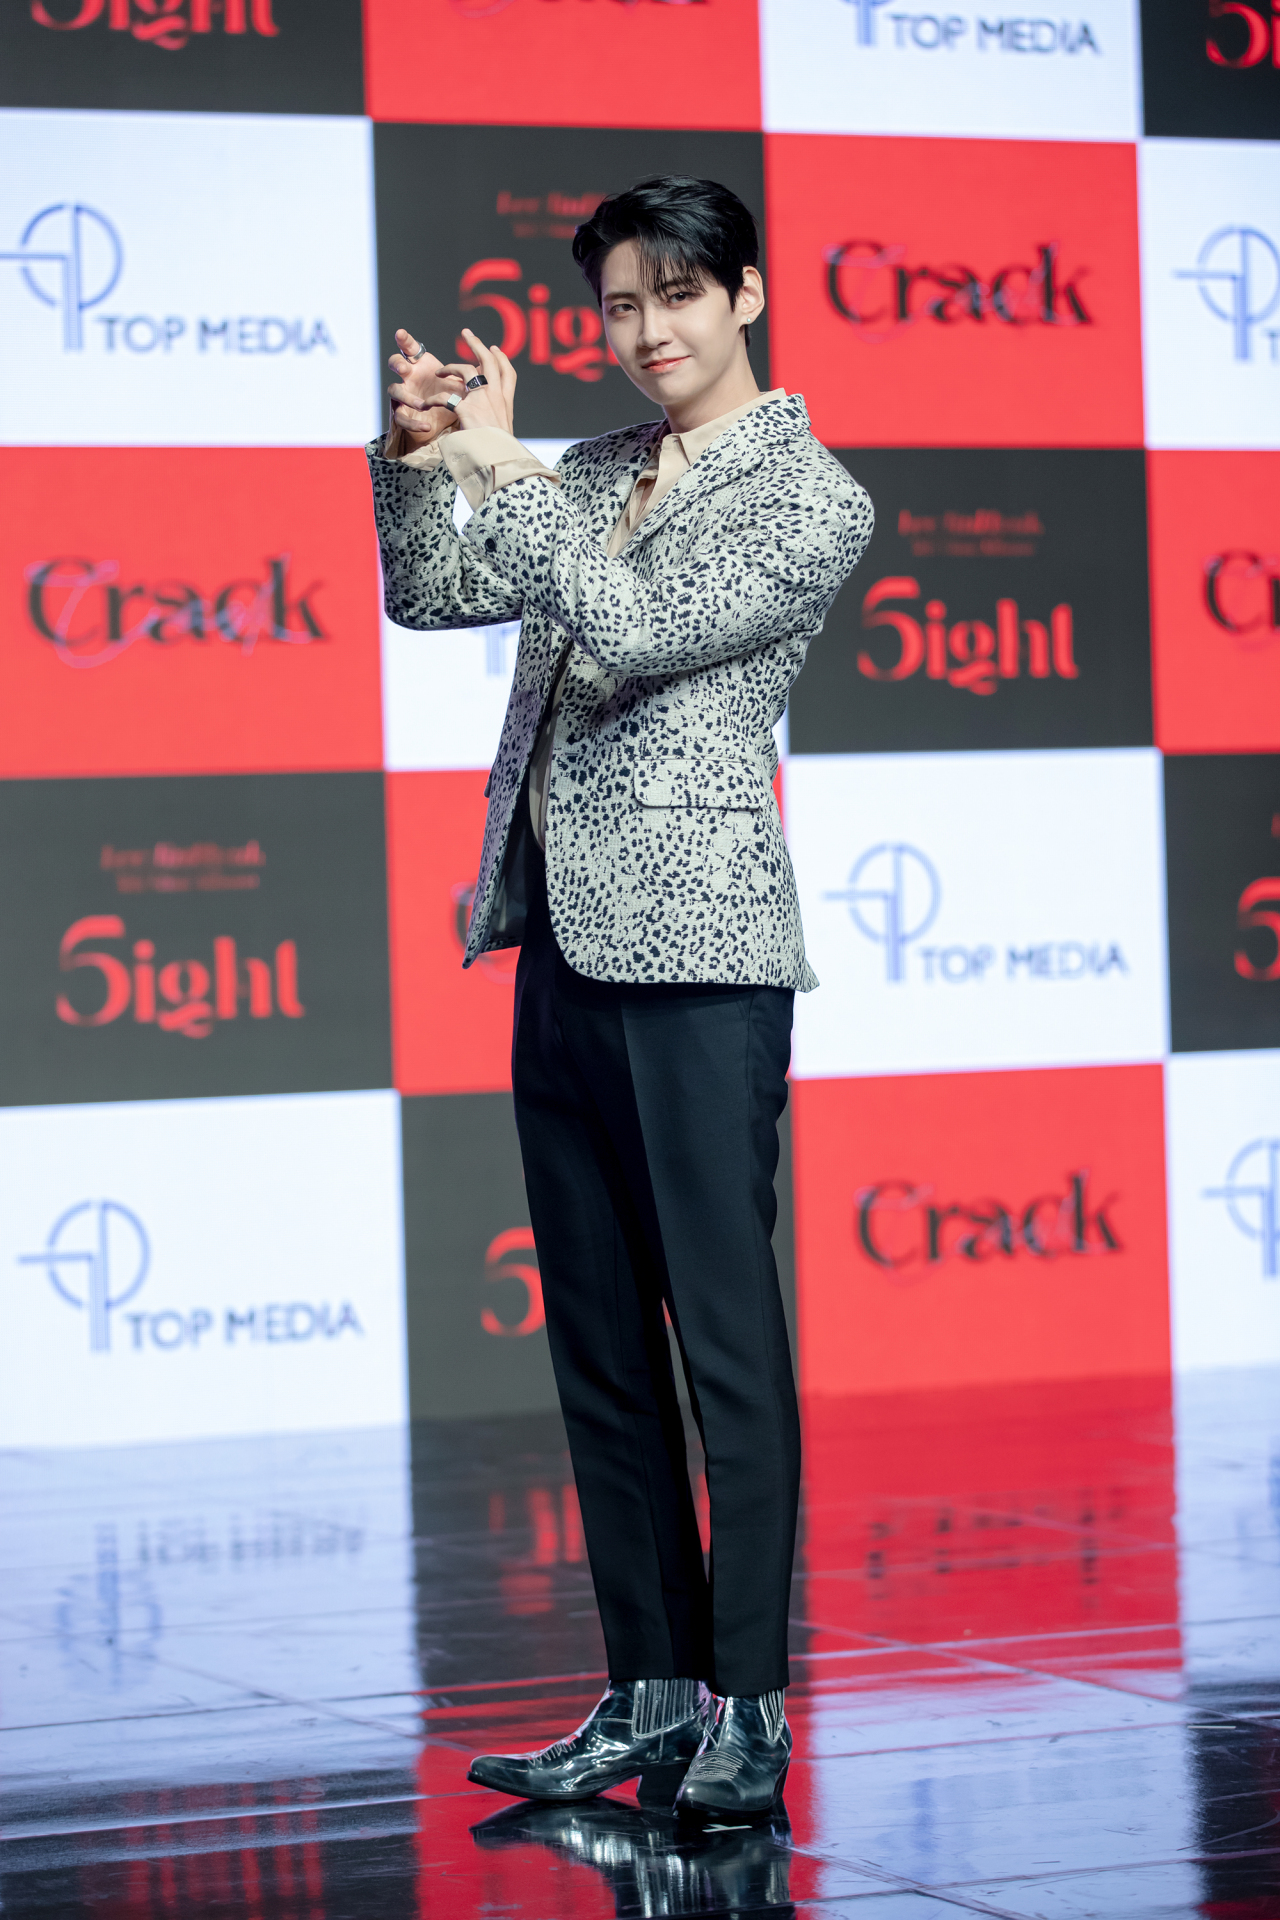 Up10tion’s Lee Jin-hyuk poses for photos during a press event for his fifth solo EP, “5ight,” in western Seoul, Monday. (Top Media)